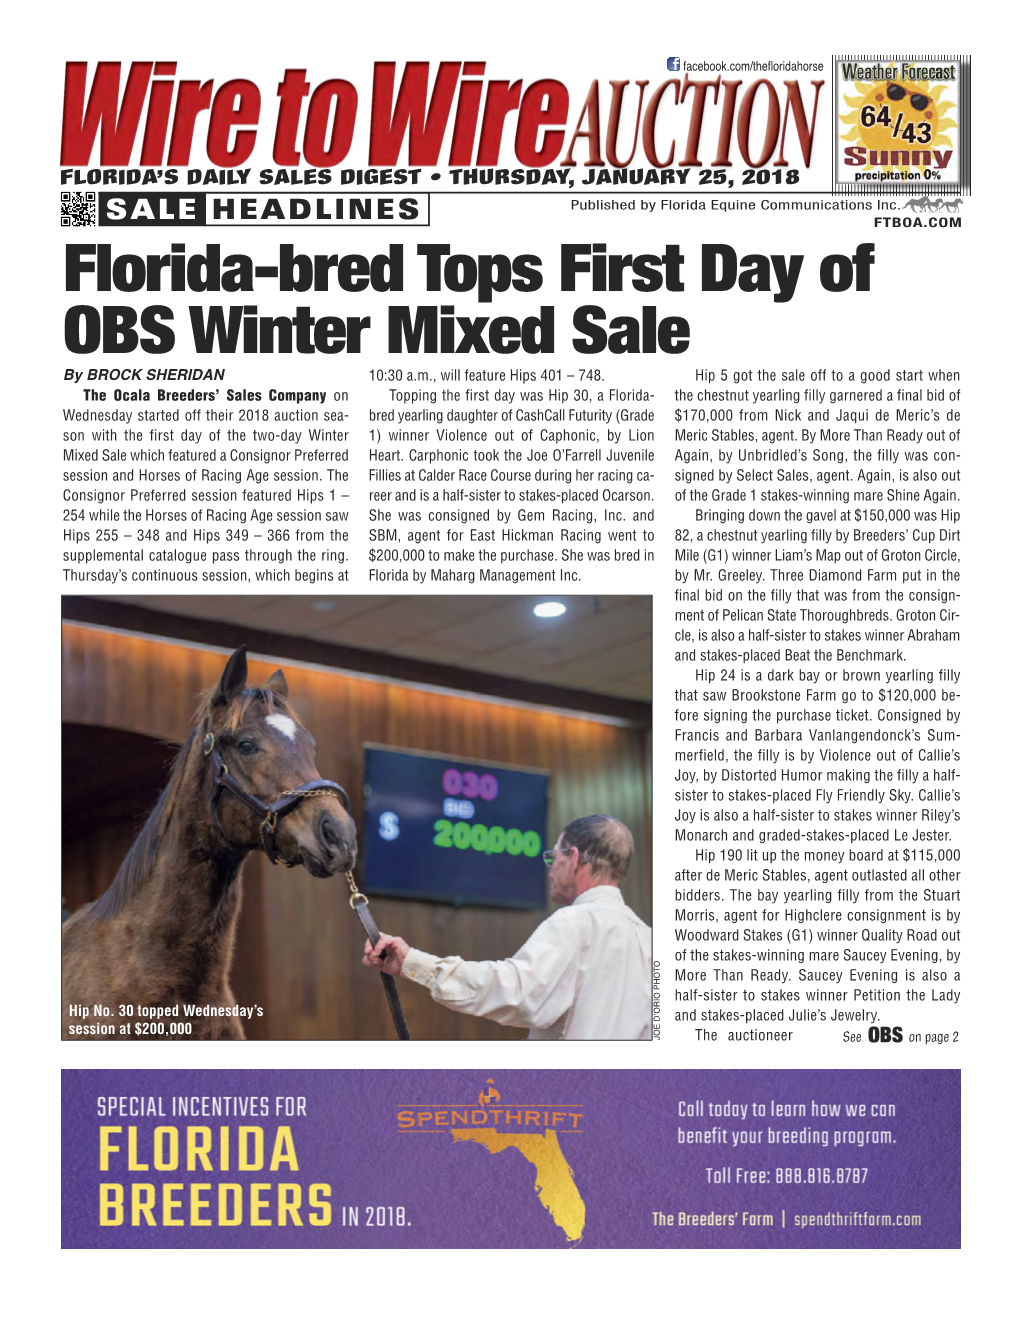 Florida-Bred Tops First Day of OBS Winter Mixed Sale 10:30 A.M., Will Feature Hips 401 – 748